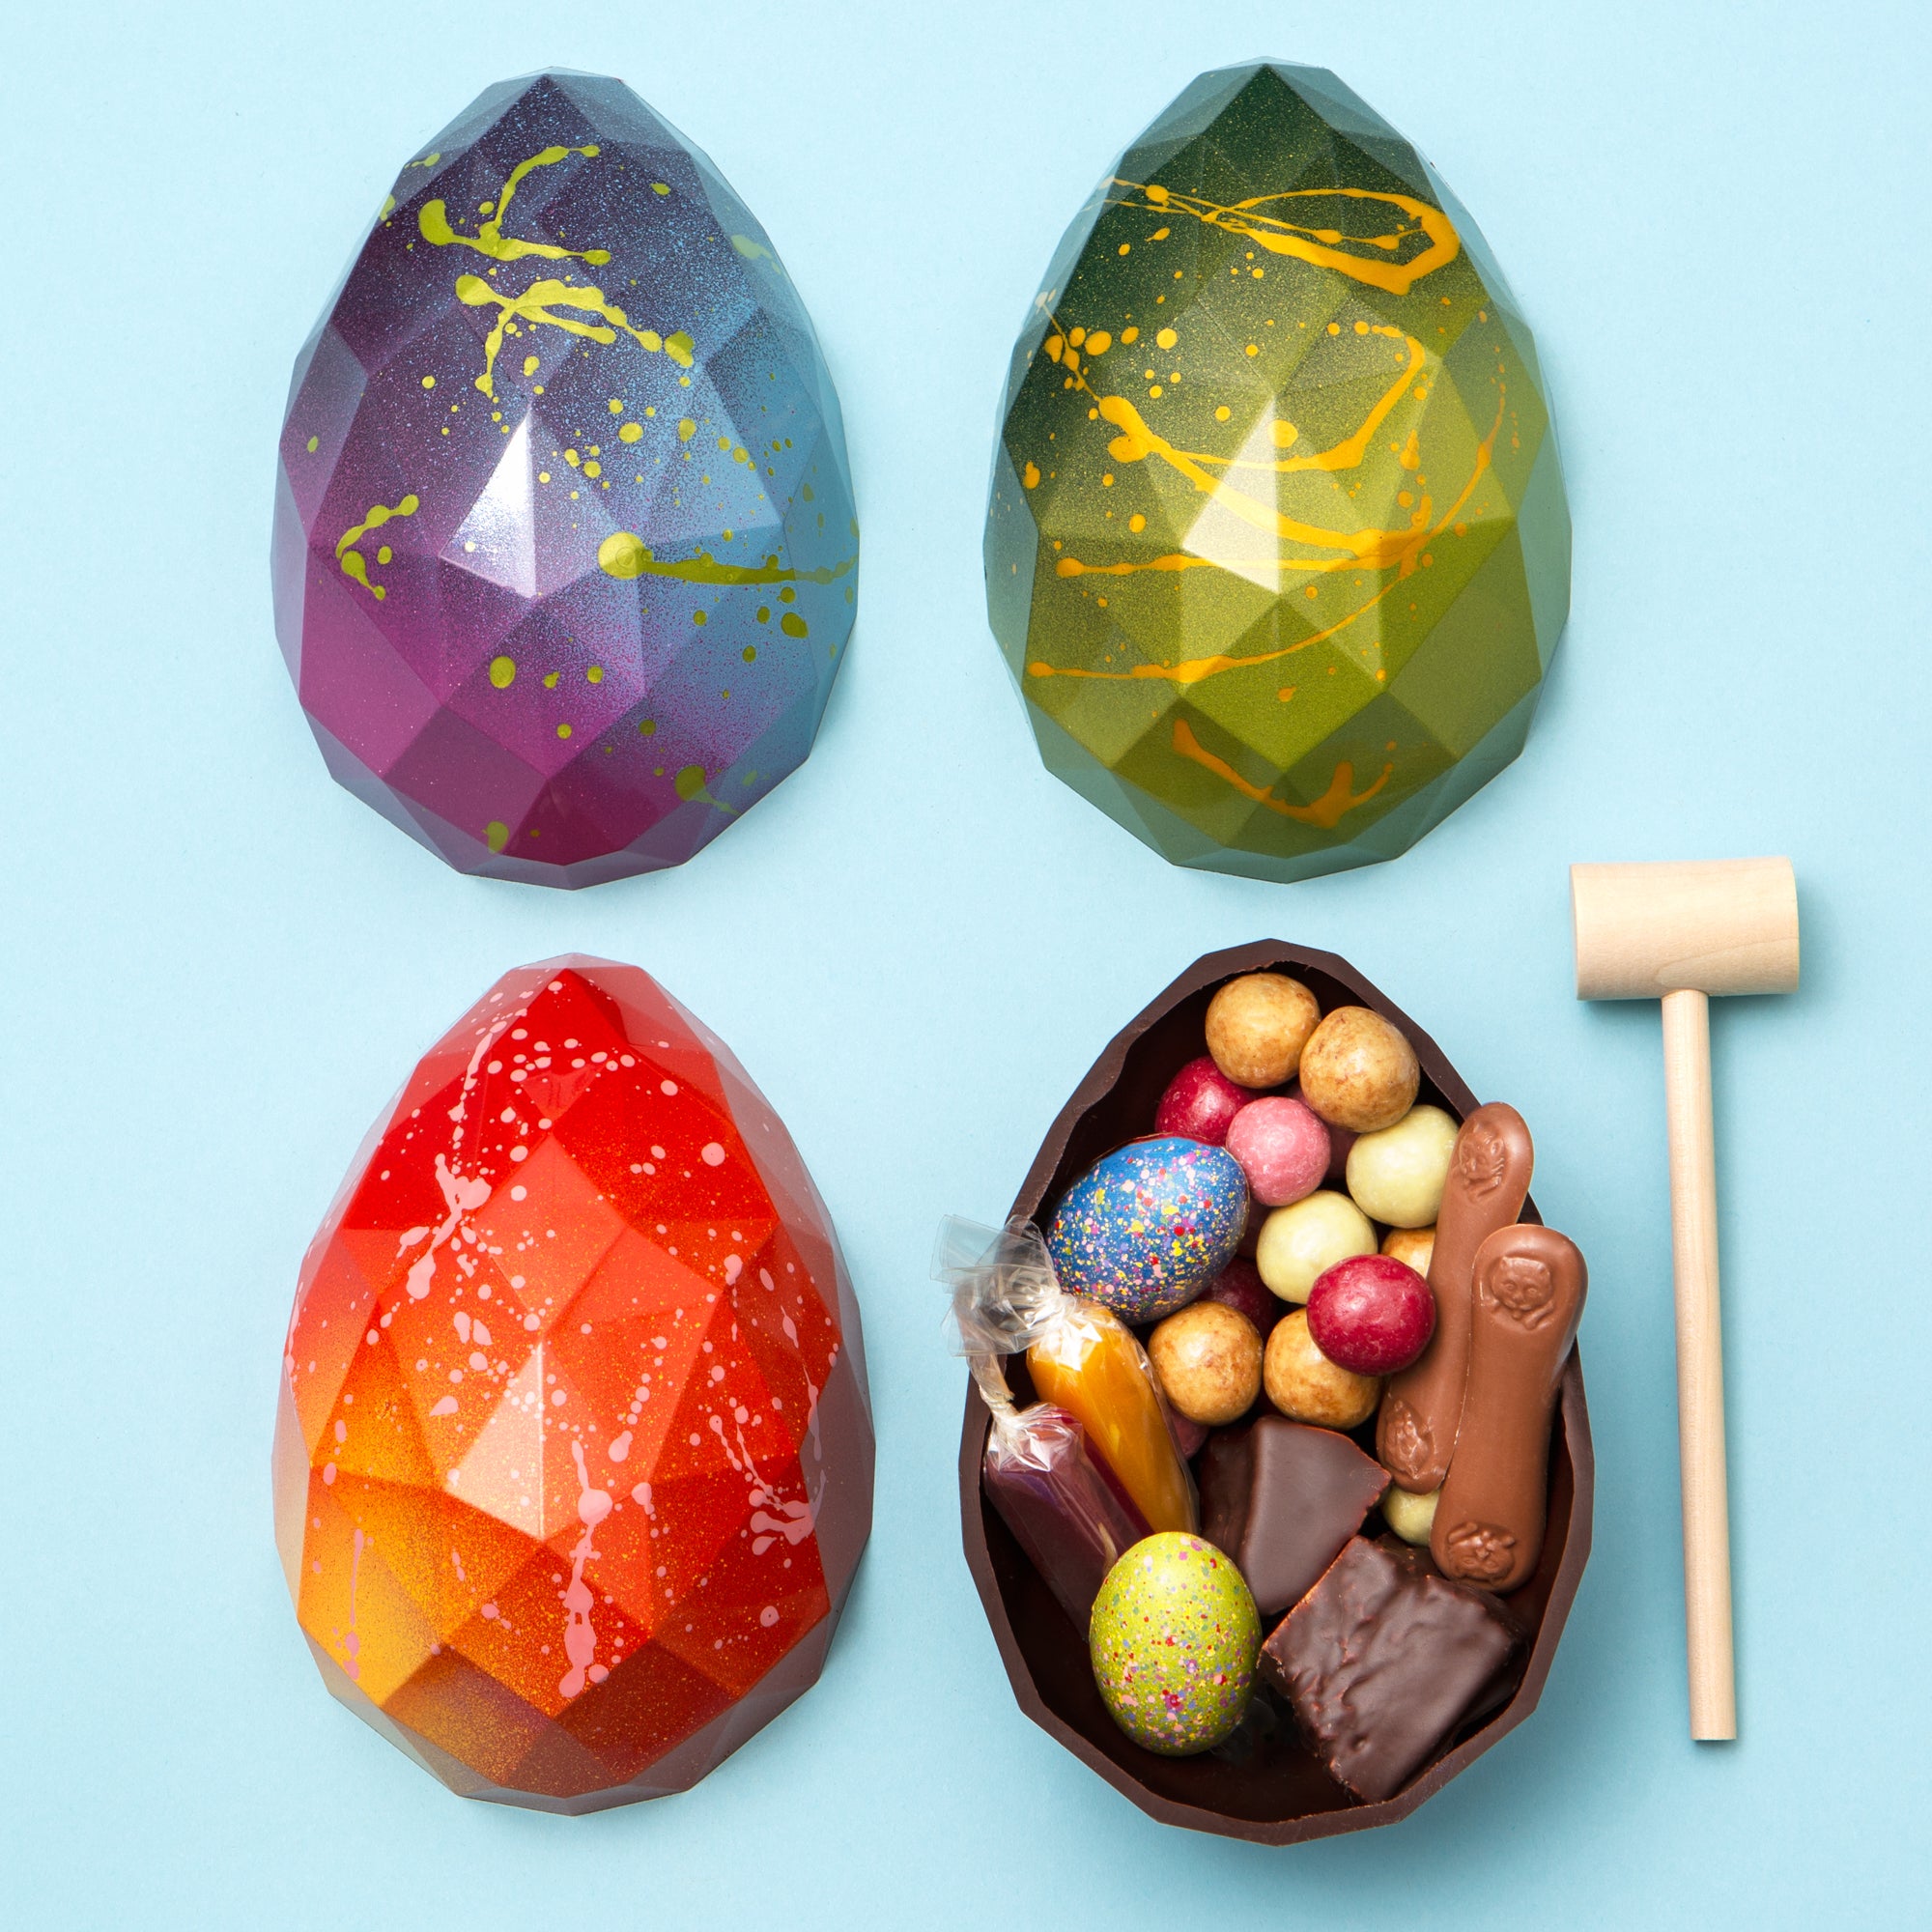 Colourful Easter Eggs with goods inside and small wooden hammer provided.